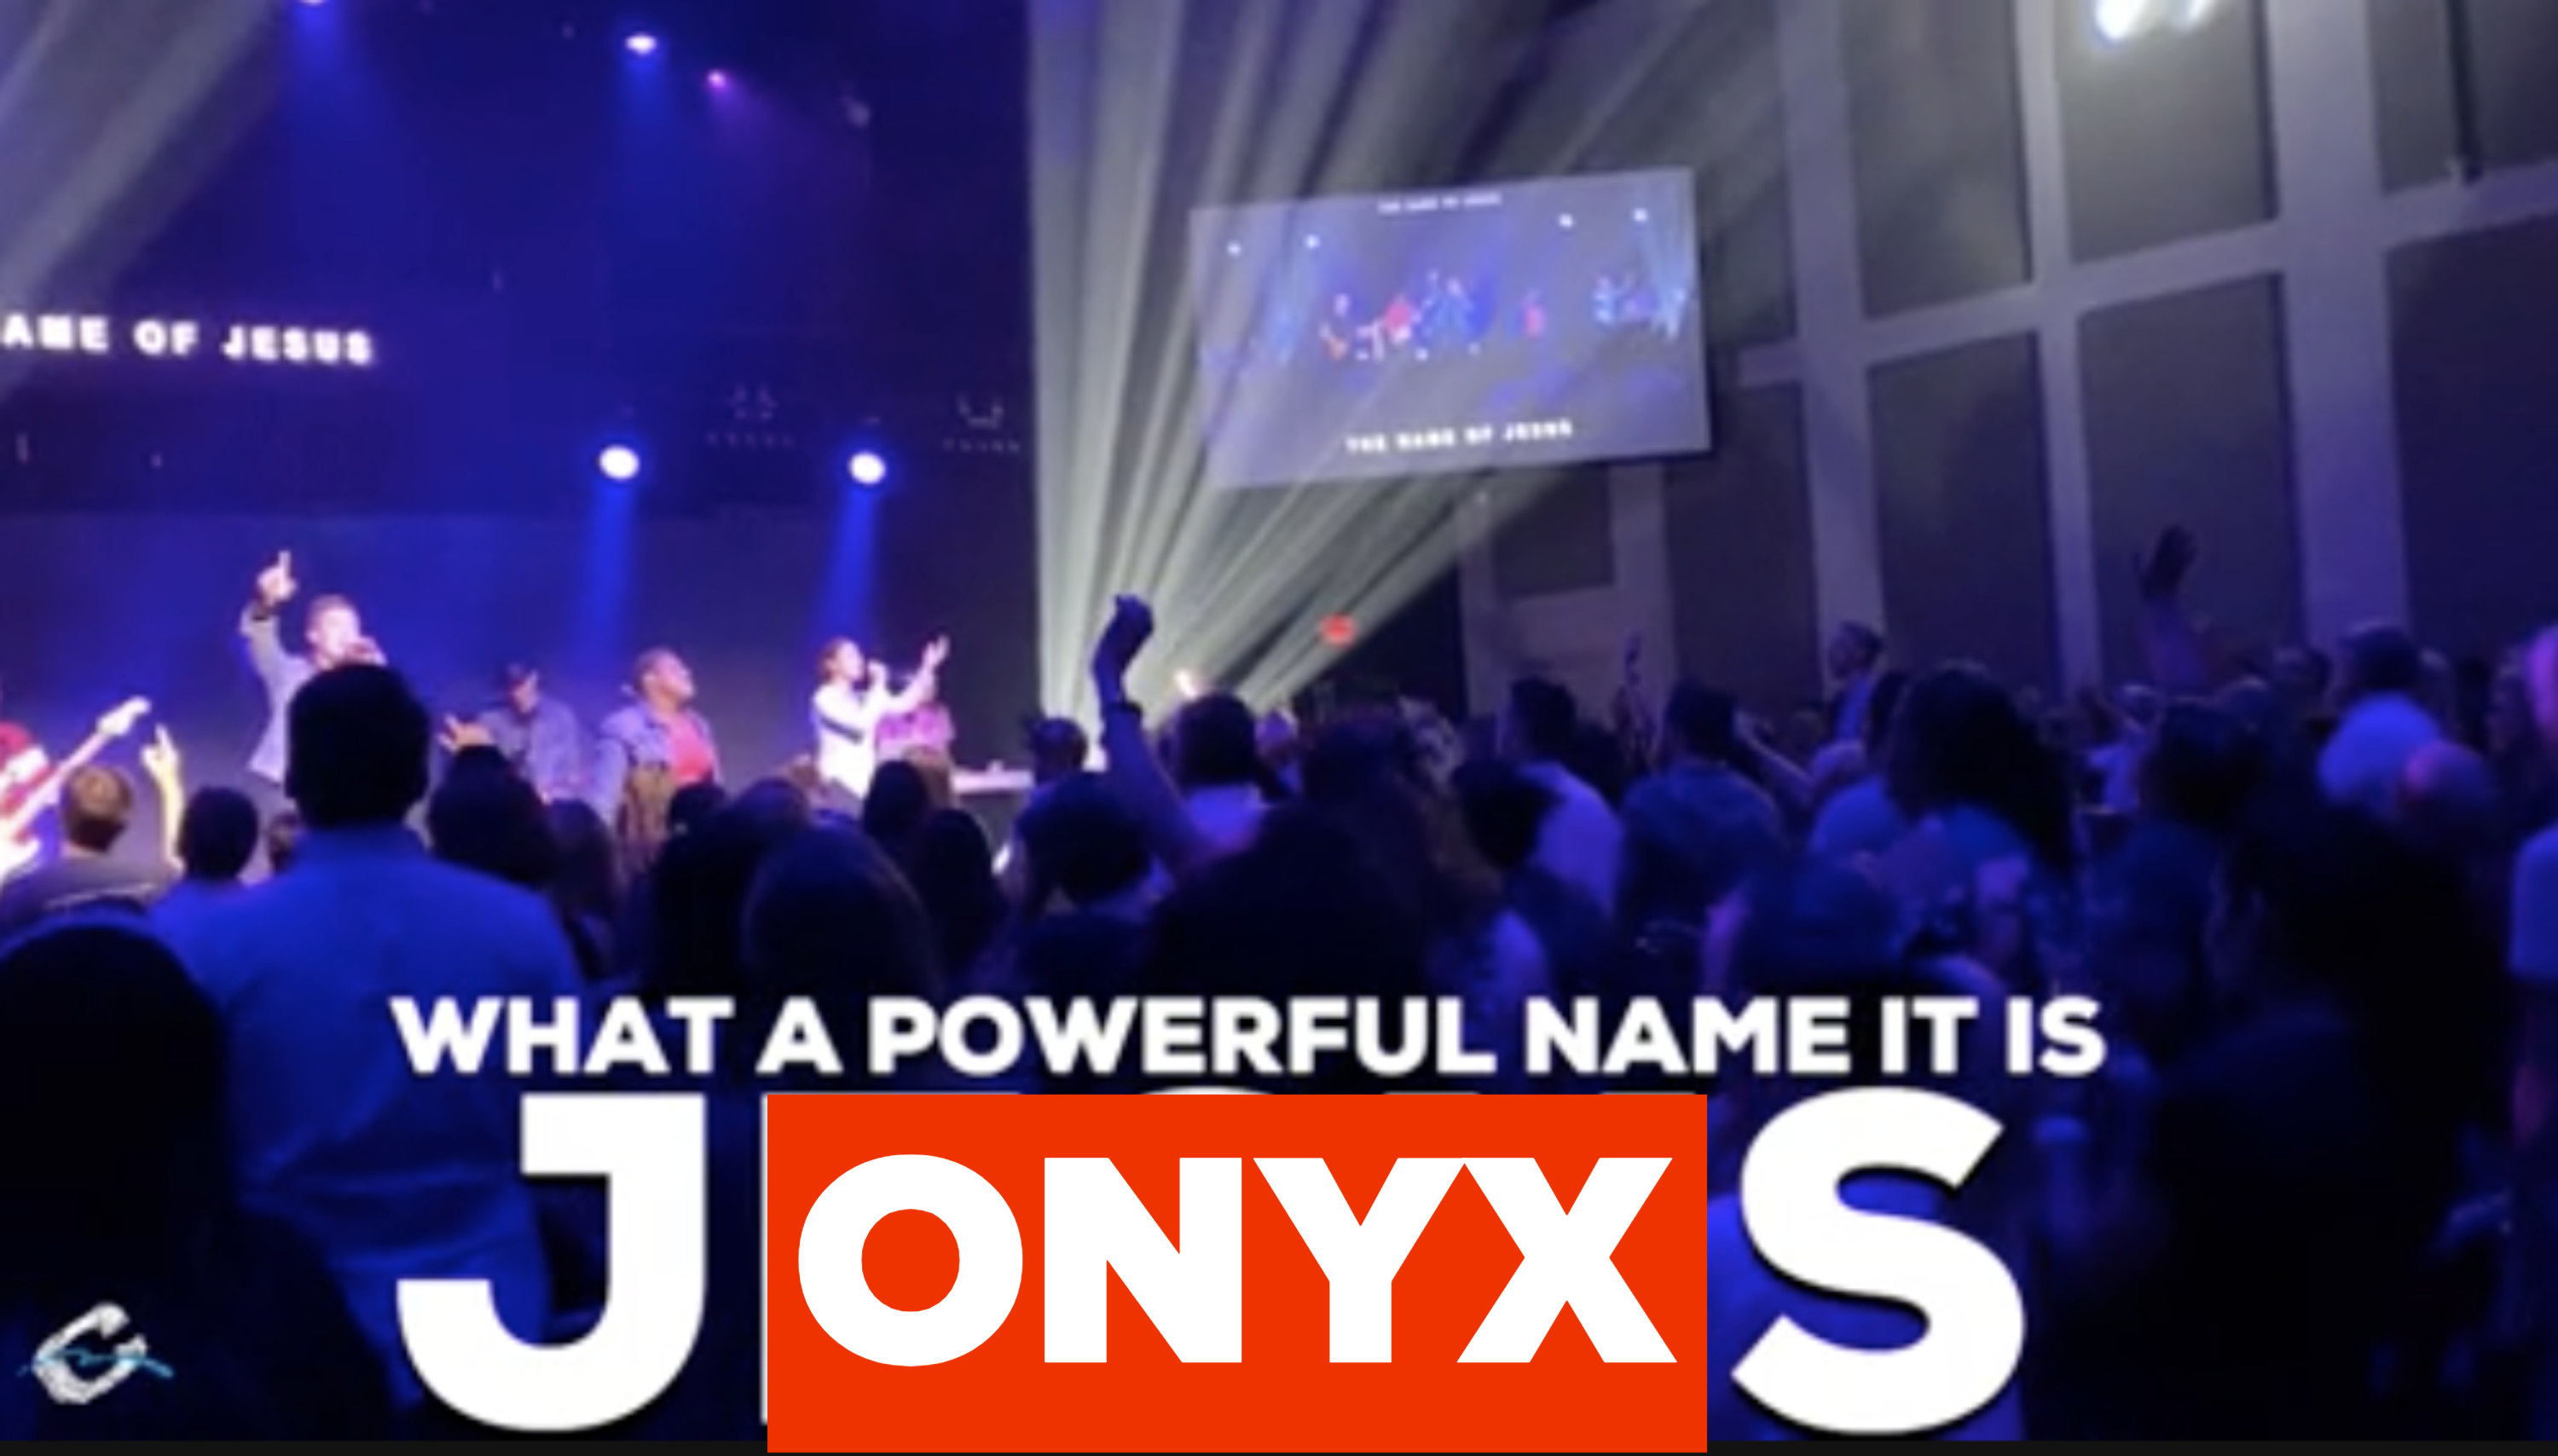 A church service and the text what a powerful name onyx is